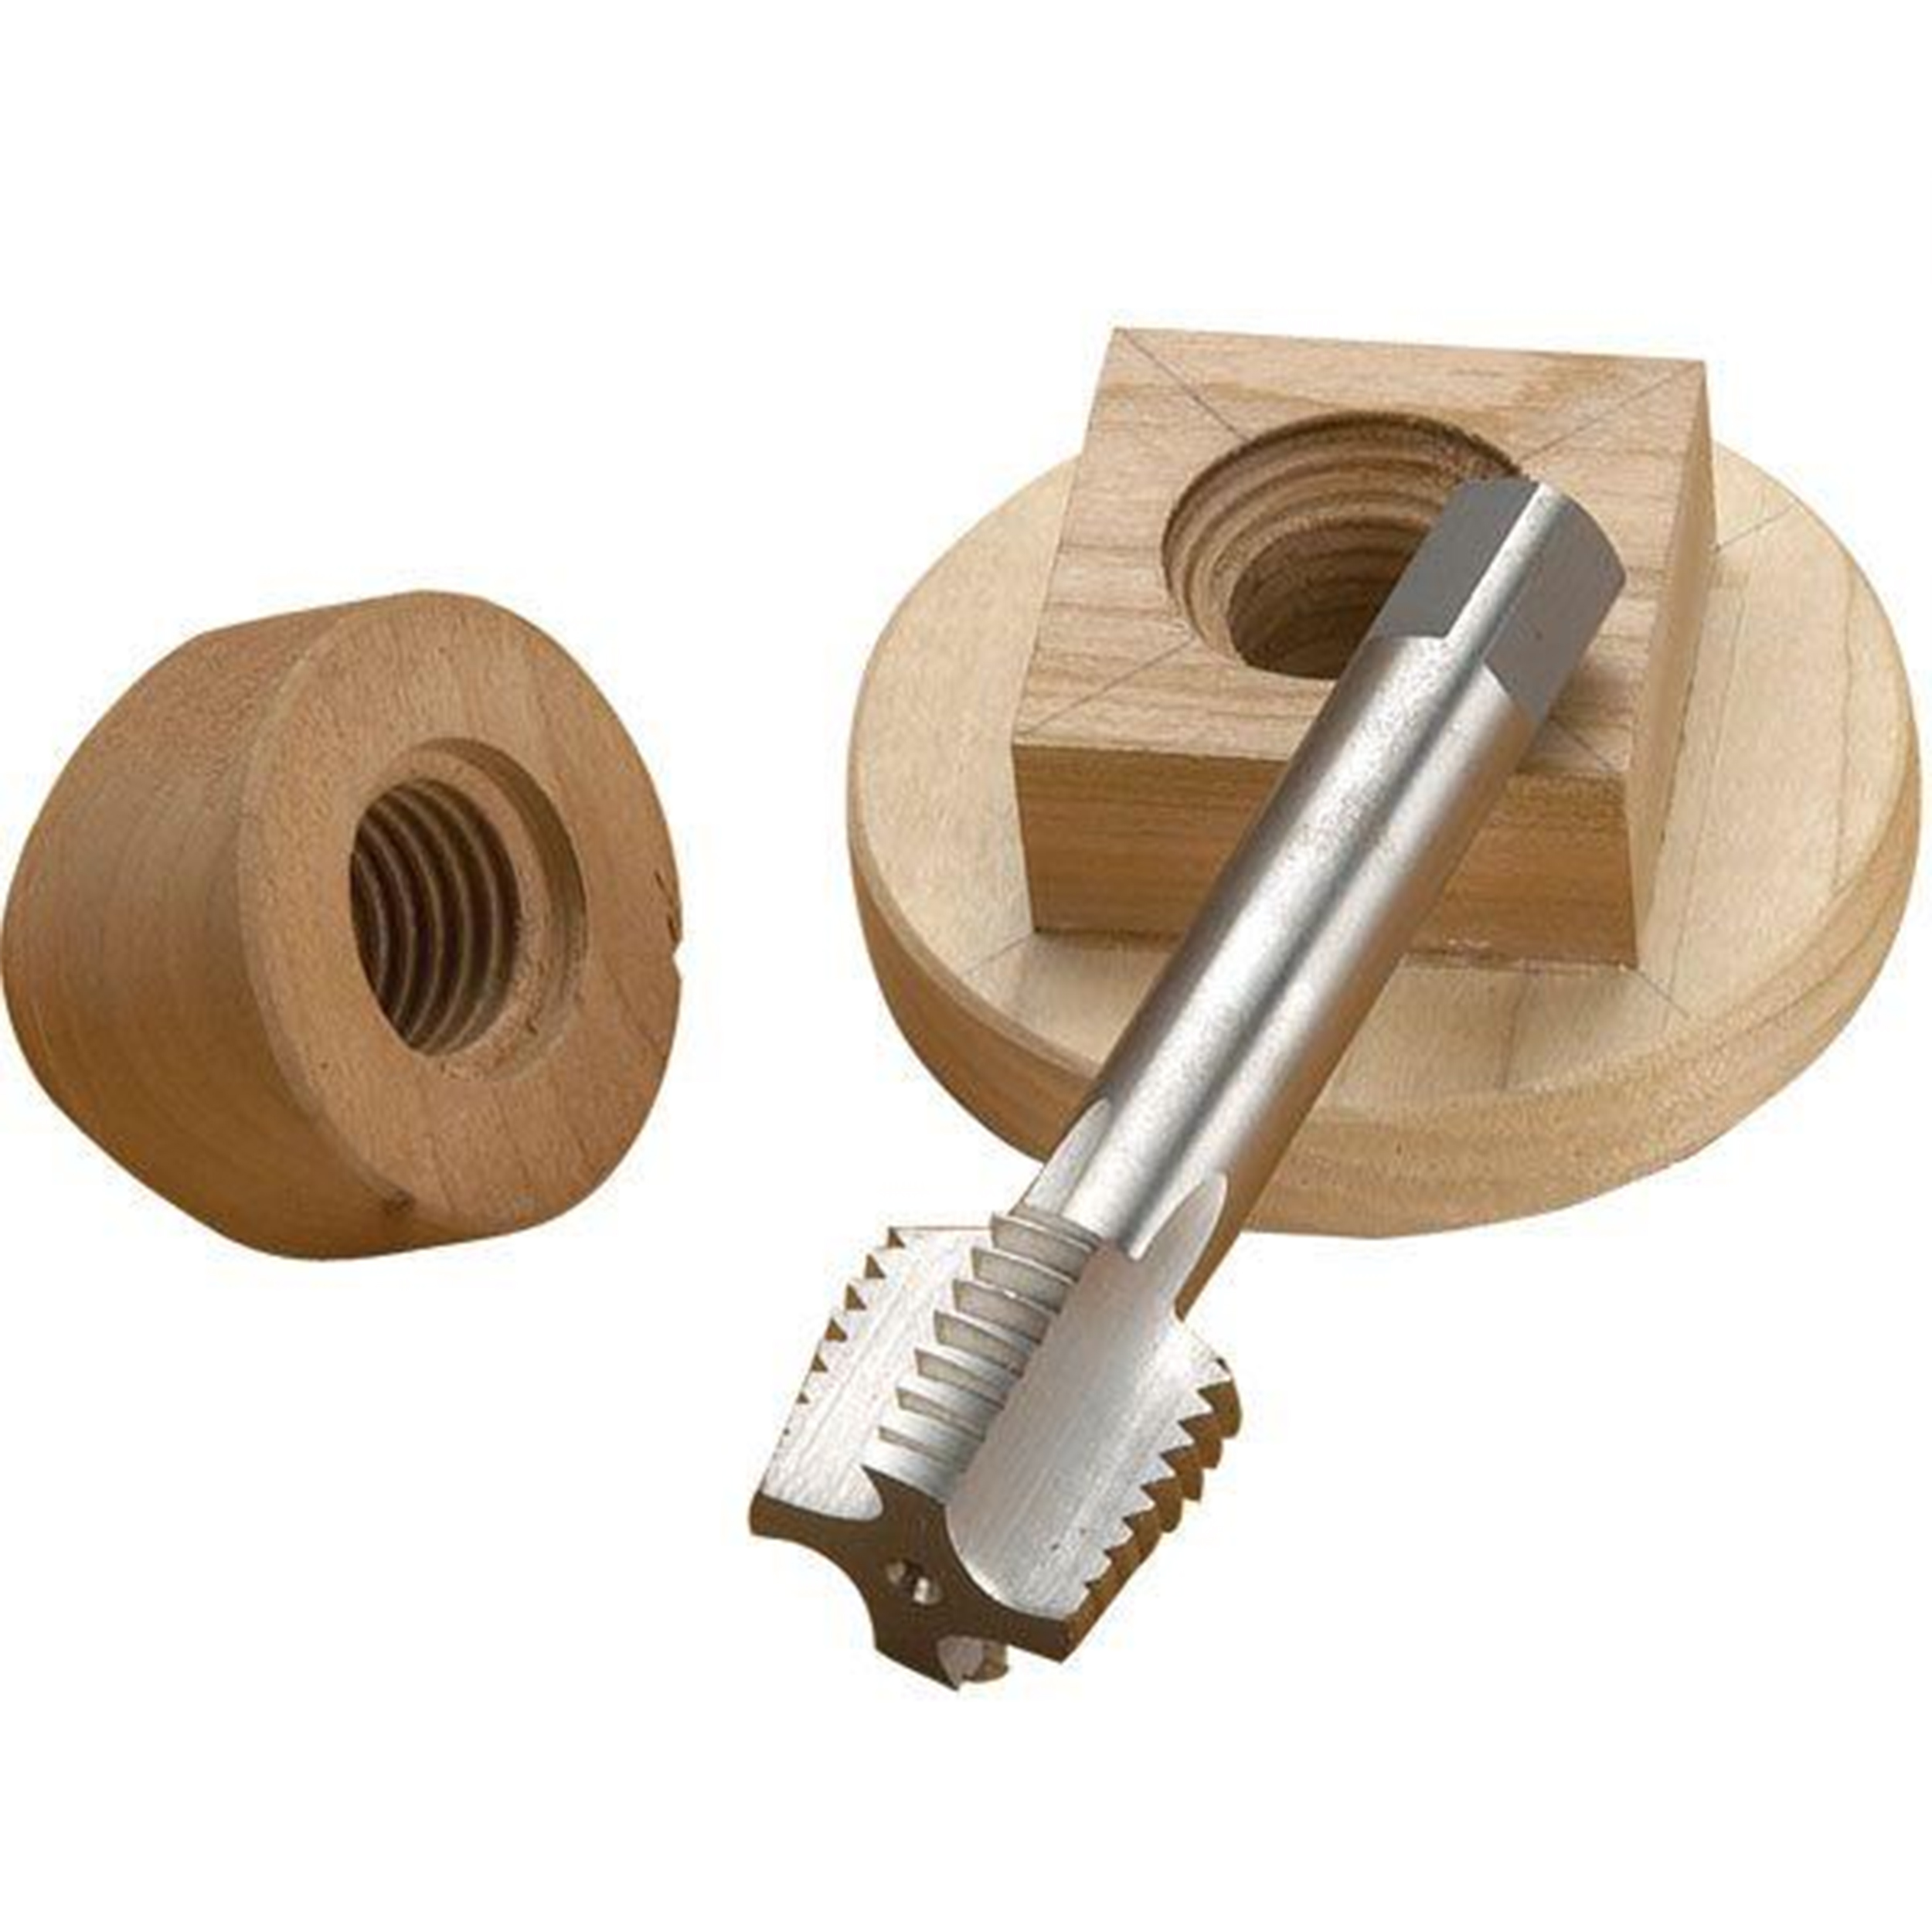 Beall Spindle Tap, 1-1/4" X 8 Tpi